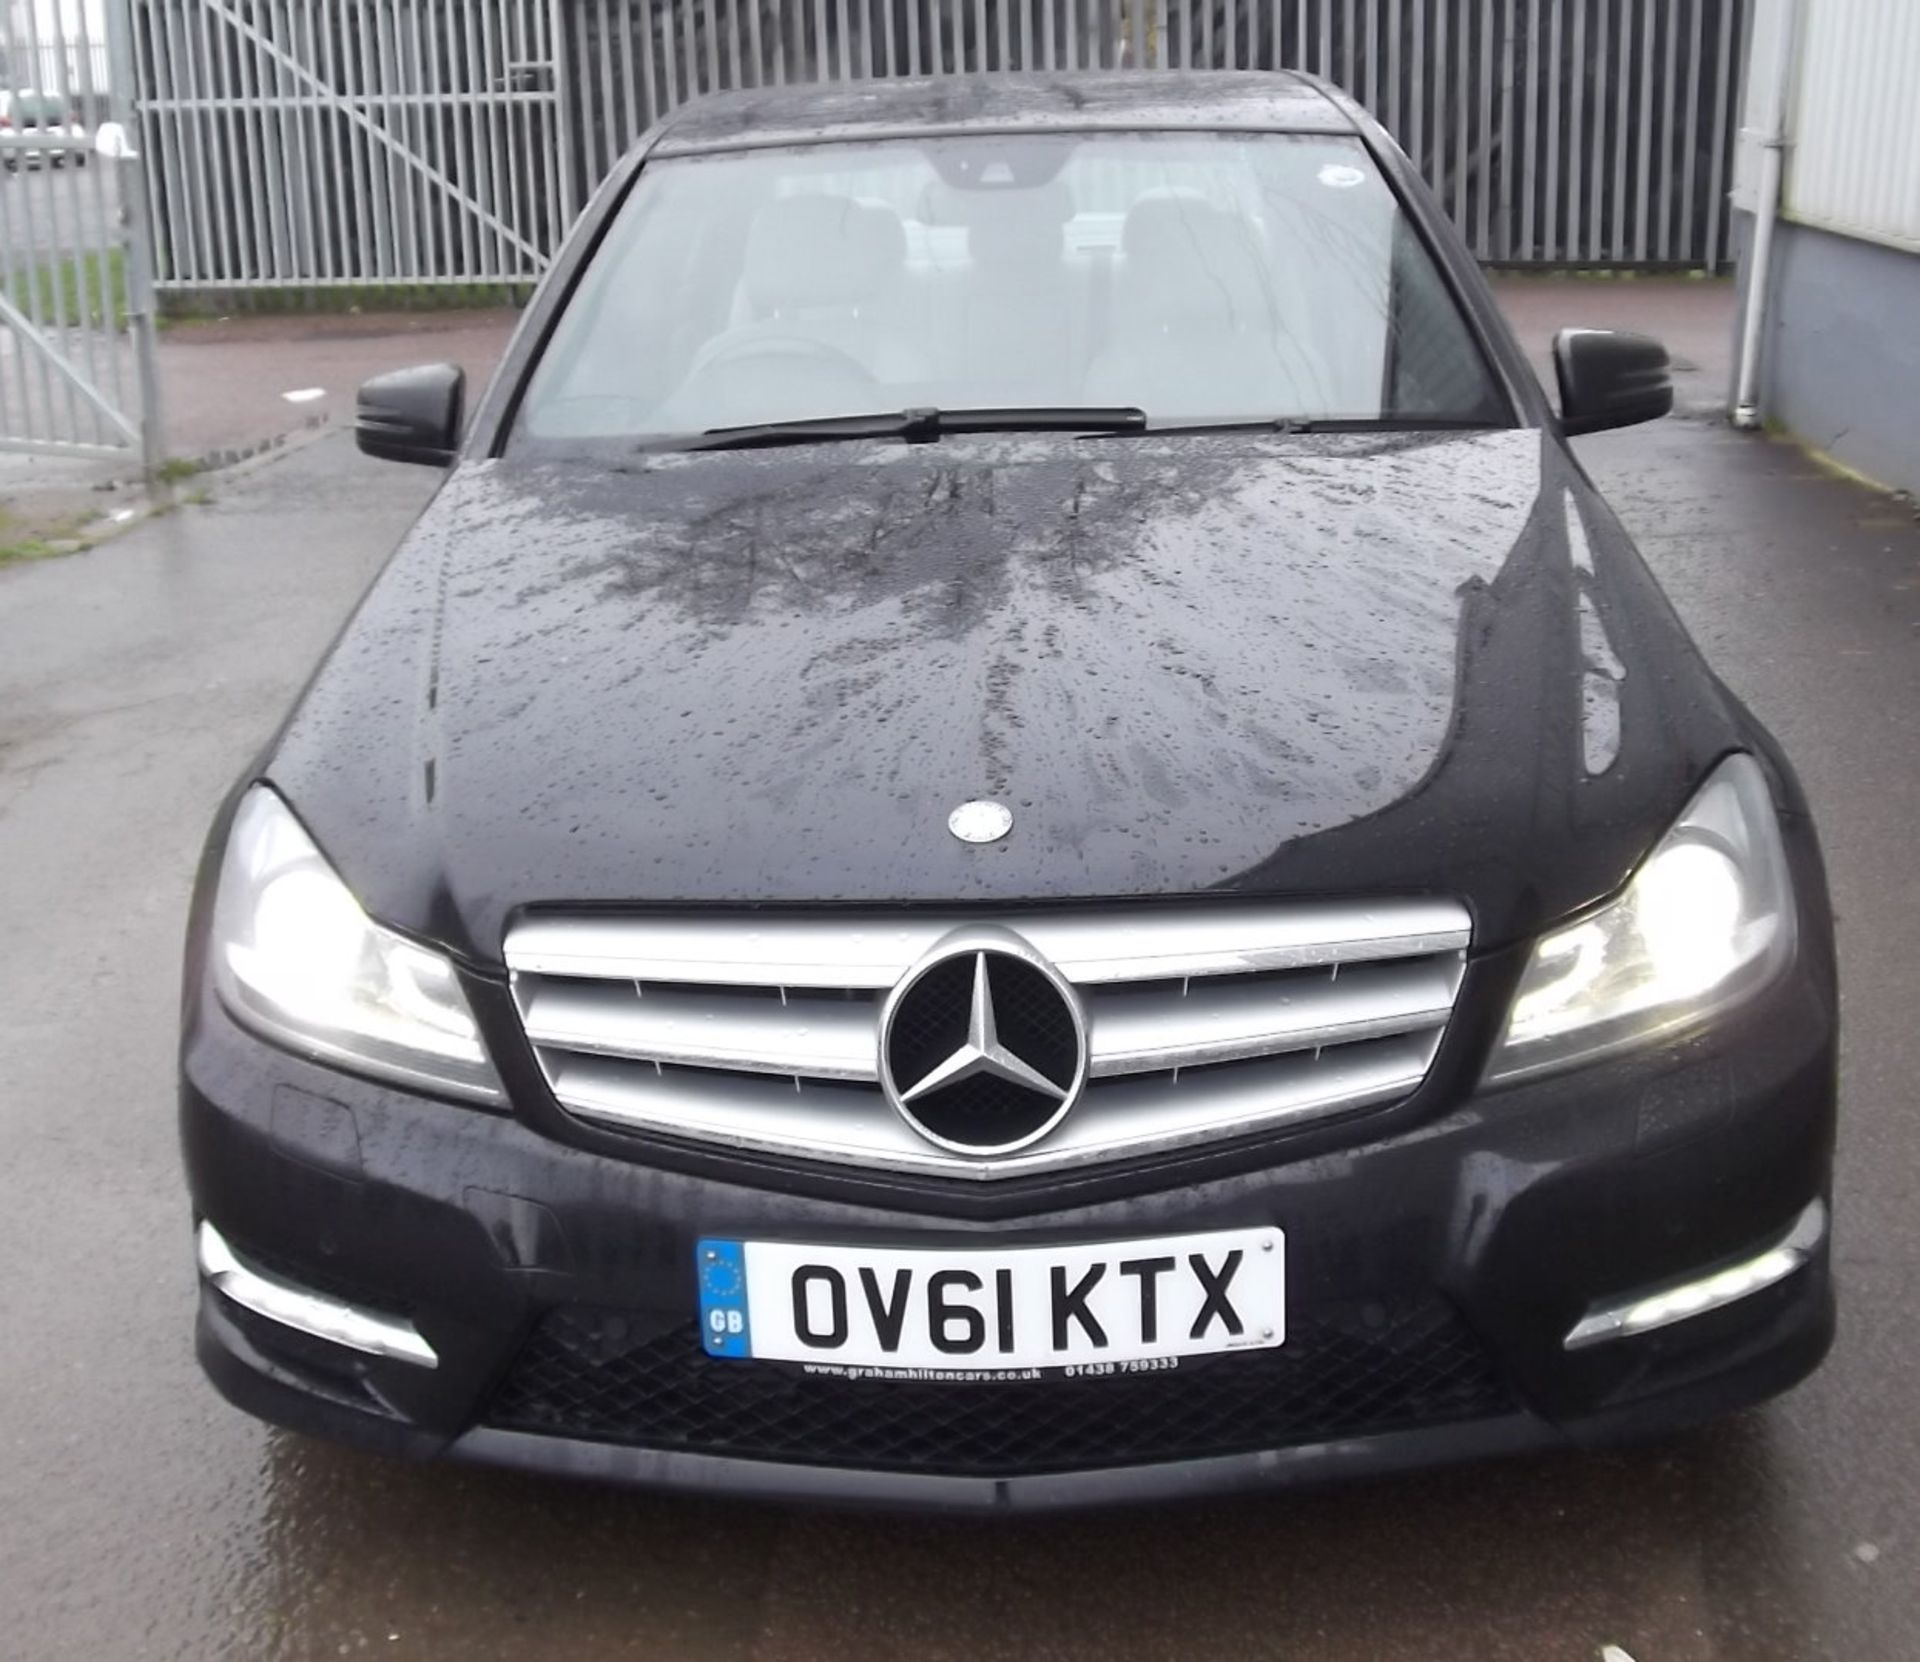 2011 Mercedes C220 CDI BlueEFFICIENCY Sport Edition 125 4dr Auto Saloon - CL505 - NO VAT ON THE HAMM - Image 12 of 21